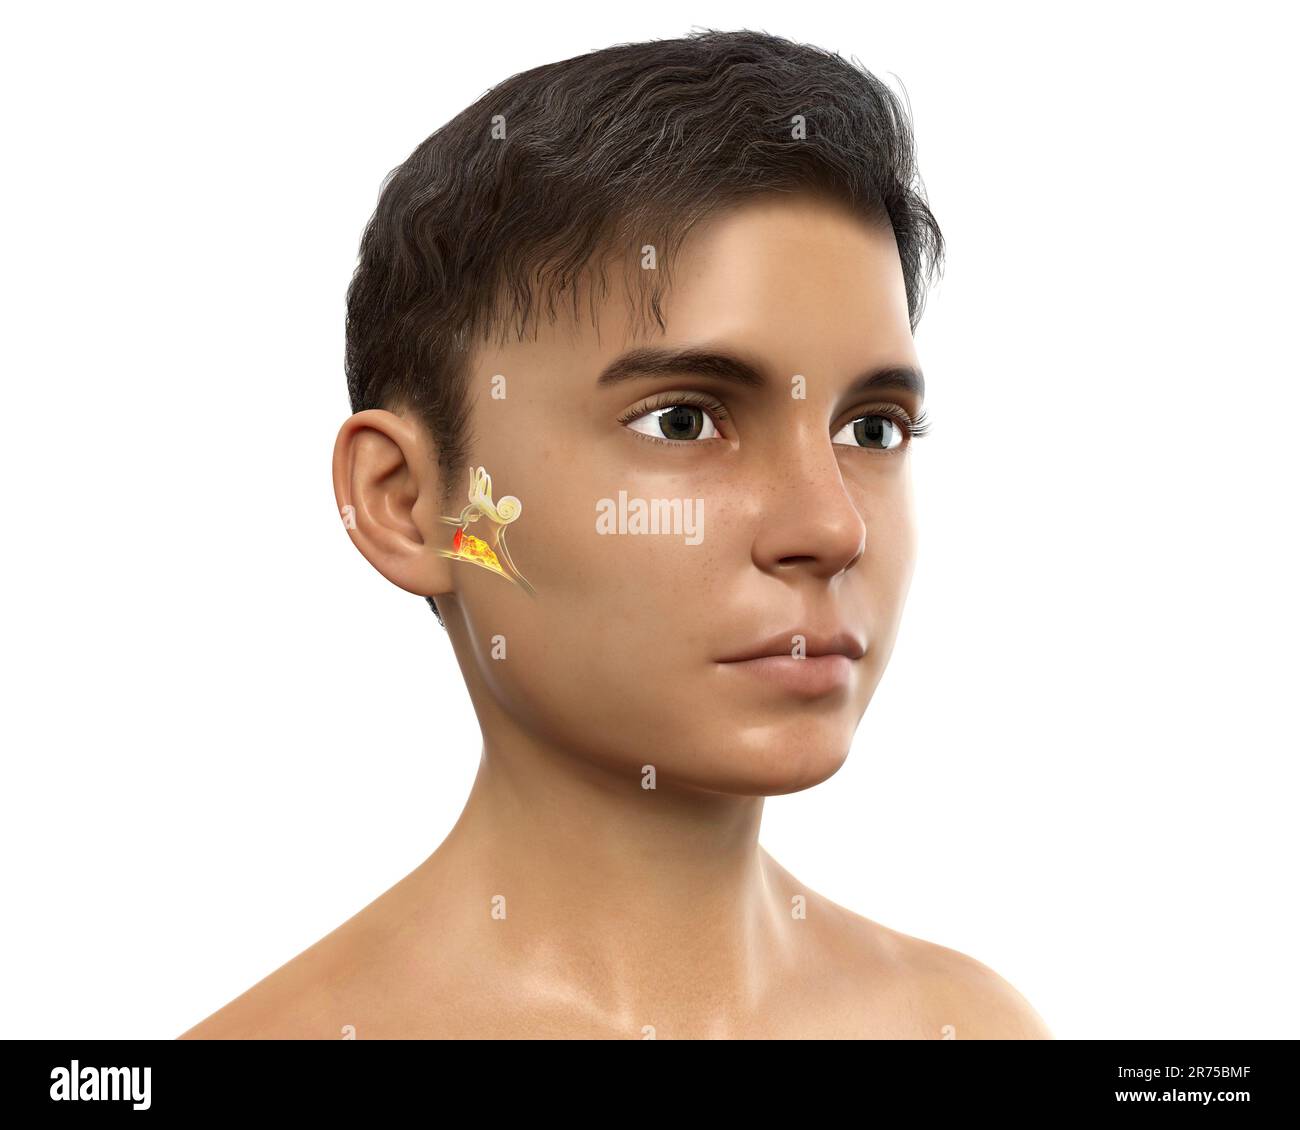 Otitis media, a group of inflammatory diseases of the middle ear. Computer illustration showing a boy with highlighted structures of the middle and in Stock Photo